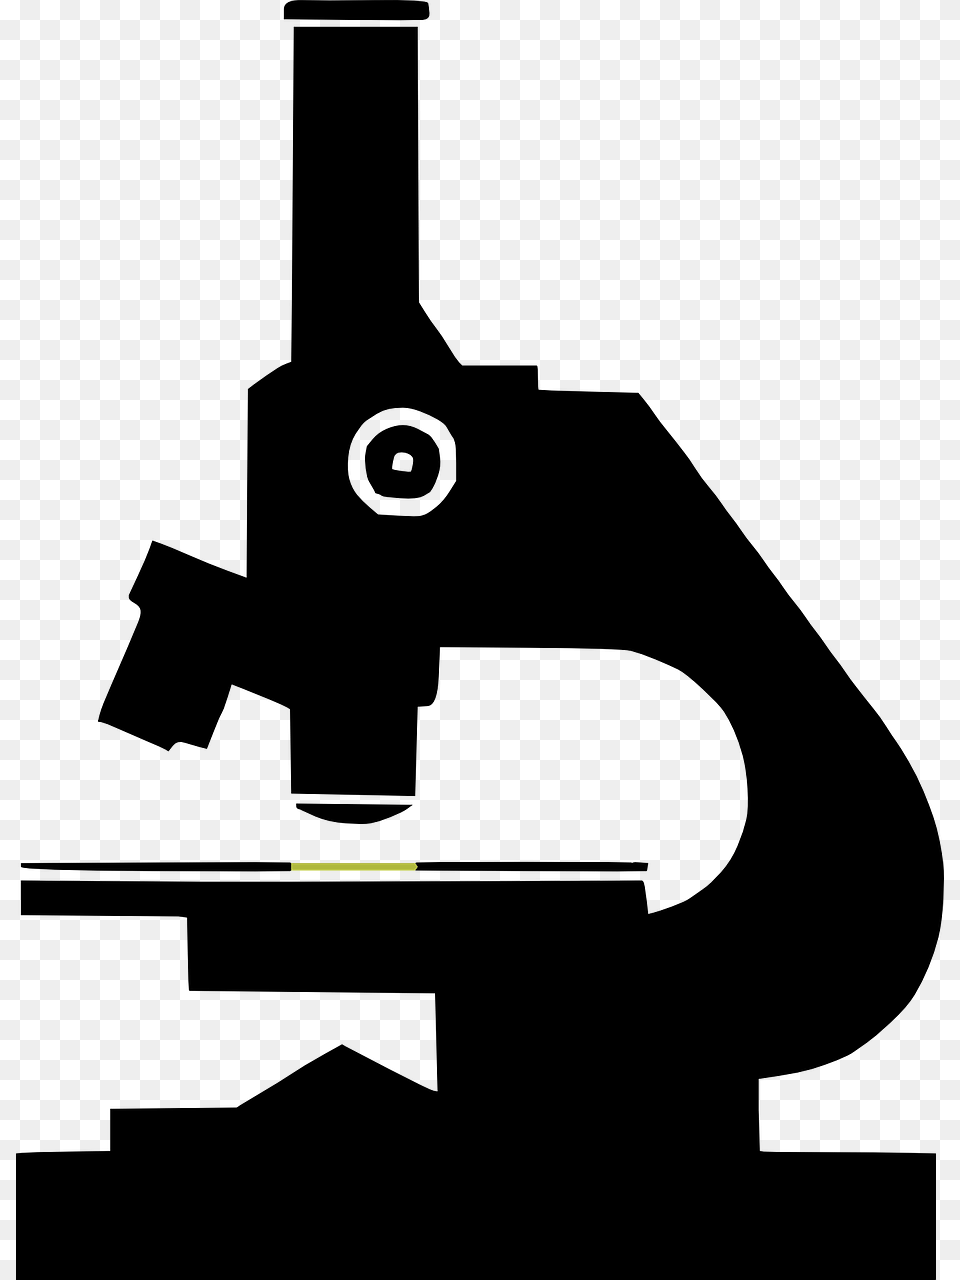 Microscope Microscopy Science Free Picture Microscope Black And White Png